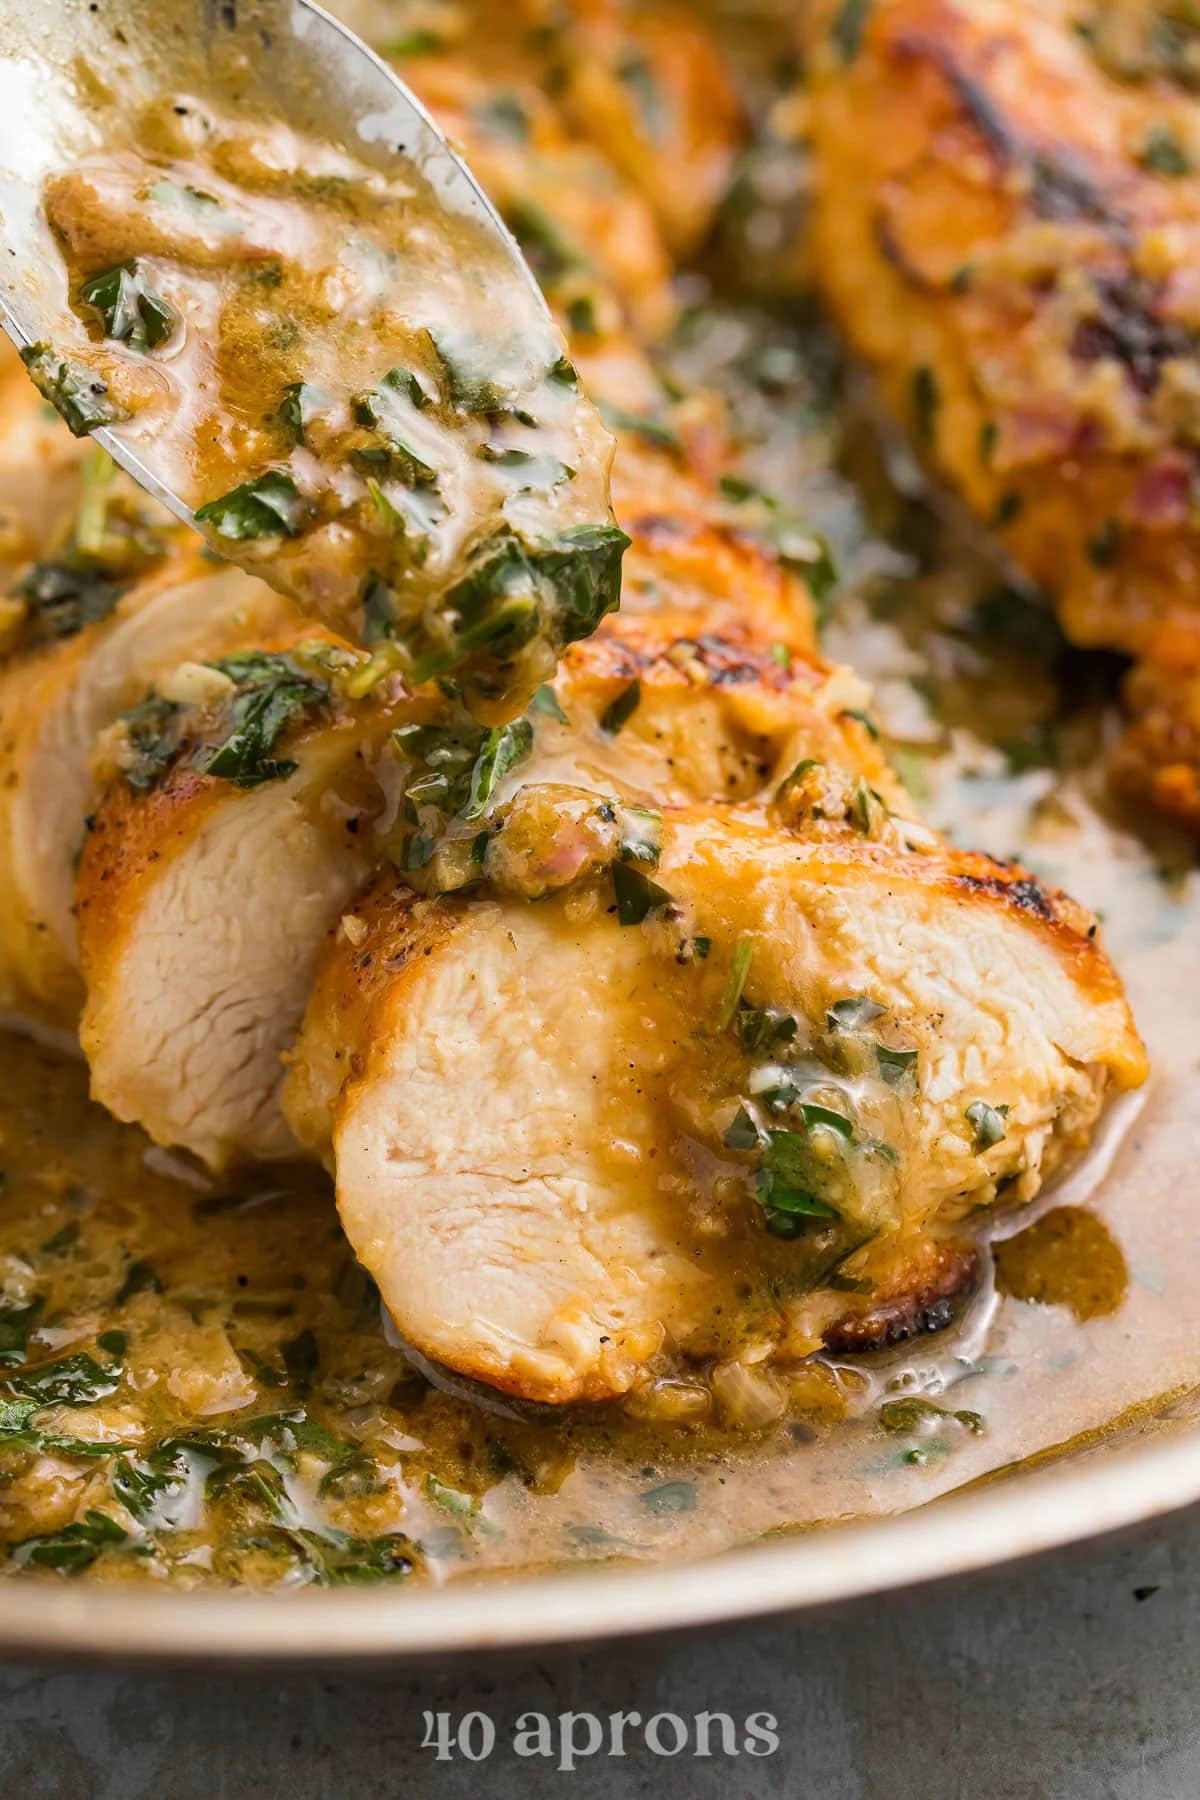 Sliced chicken breast smothered in a rich garlic herb butter sauce.